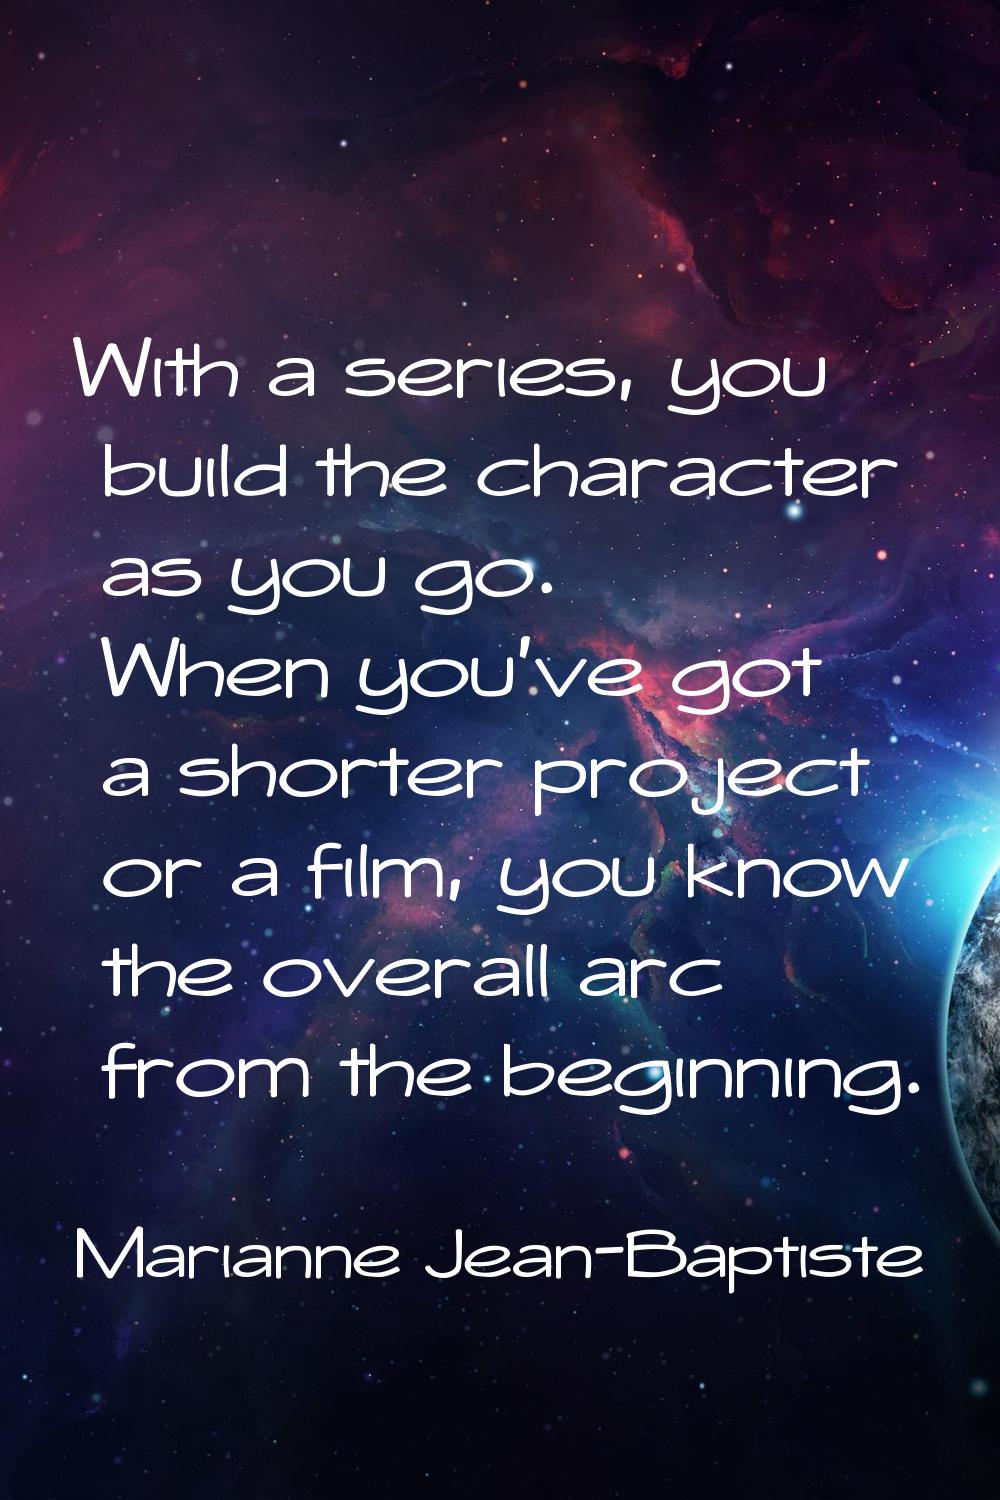 With a series, you build the character as you go. When you've got a shorter project or a film, you 